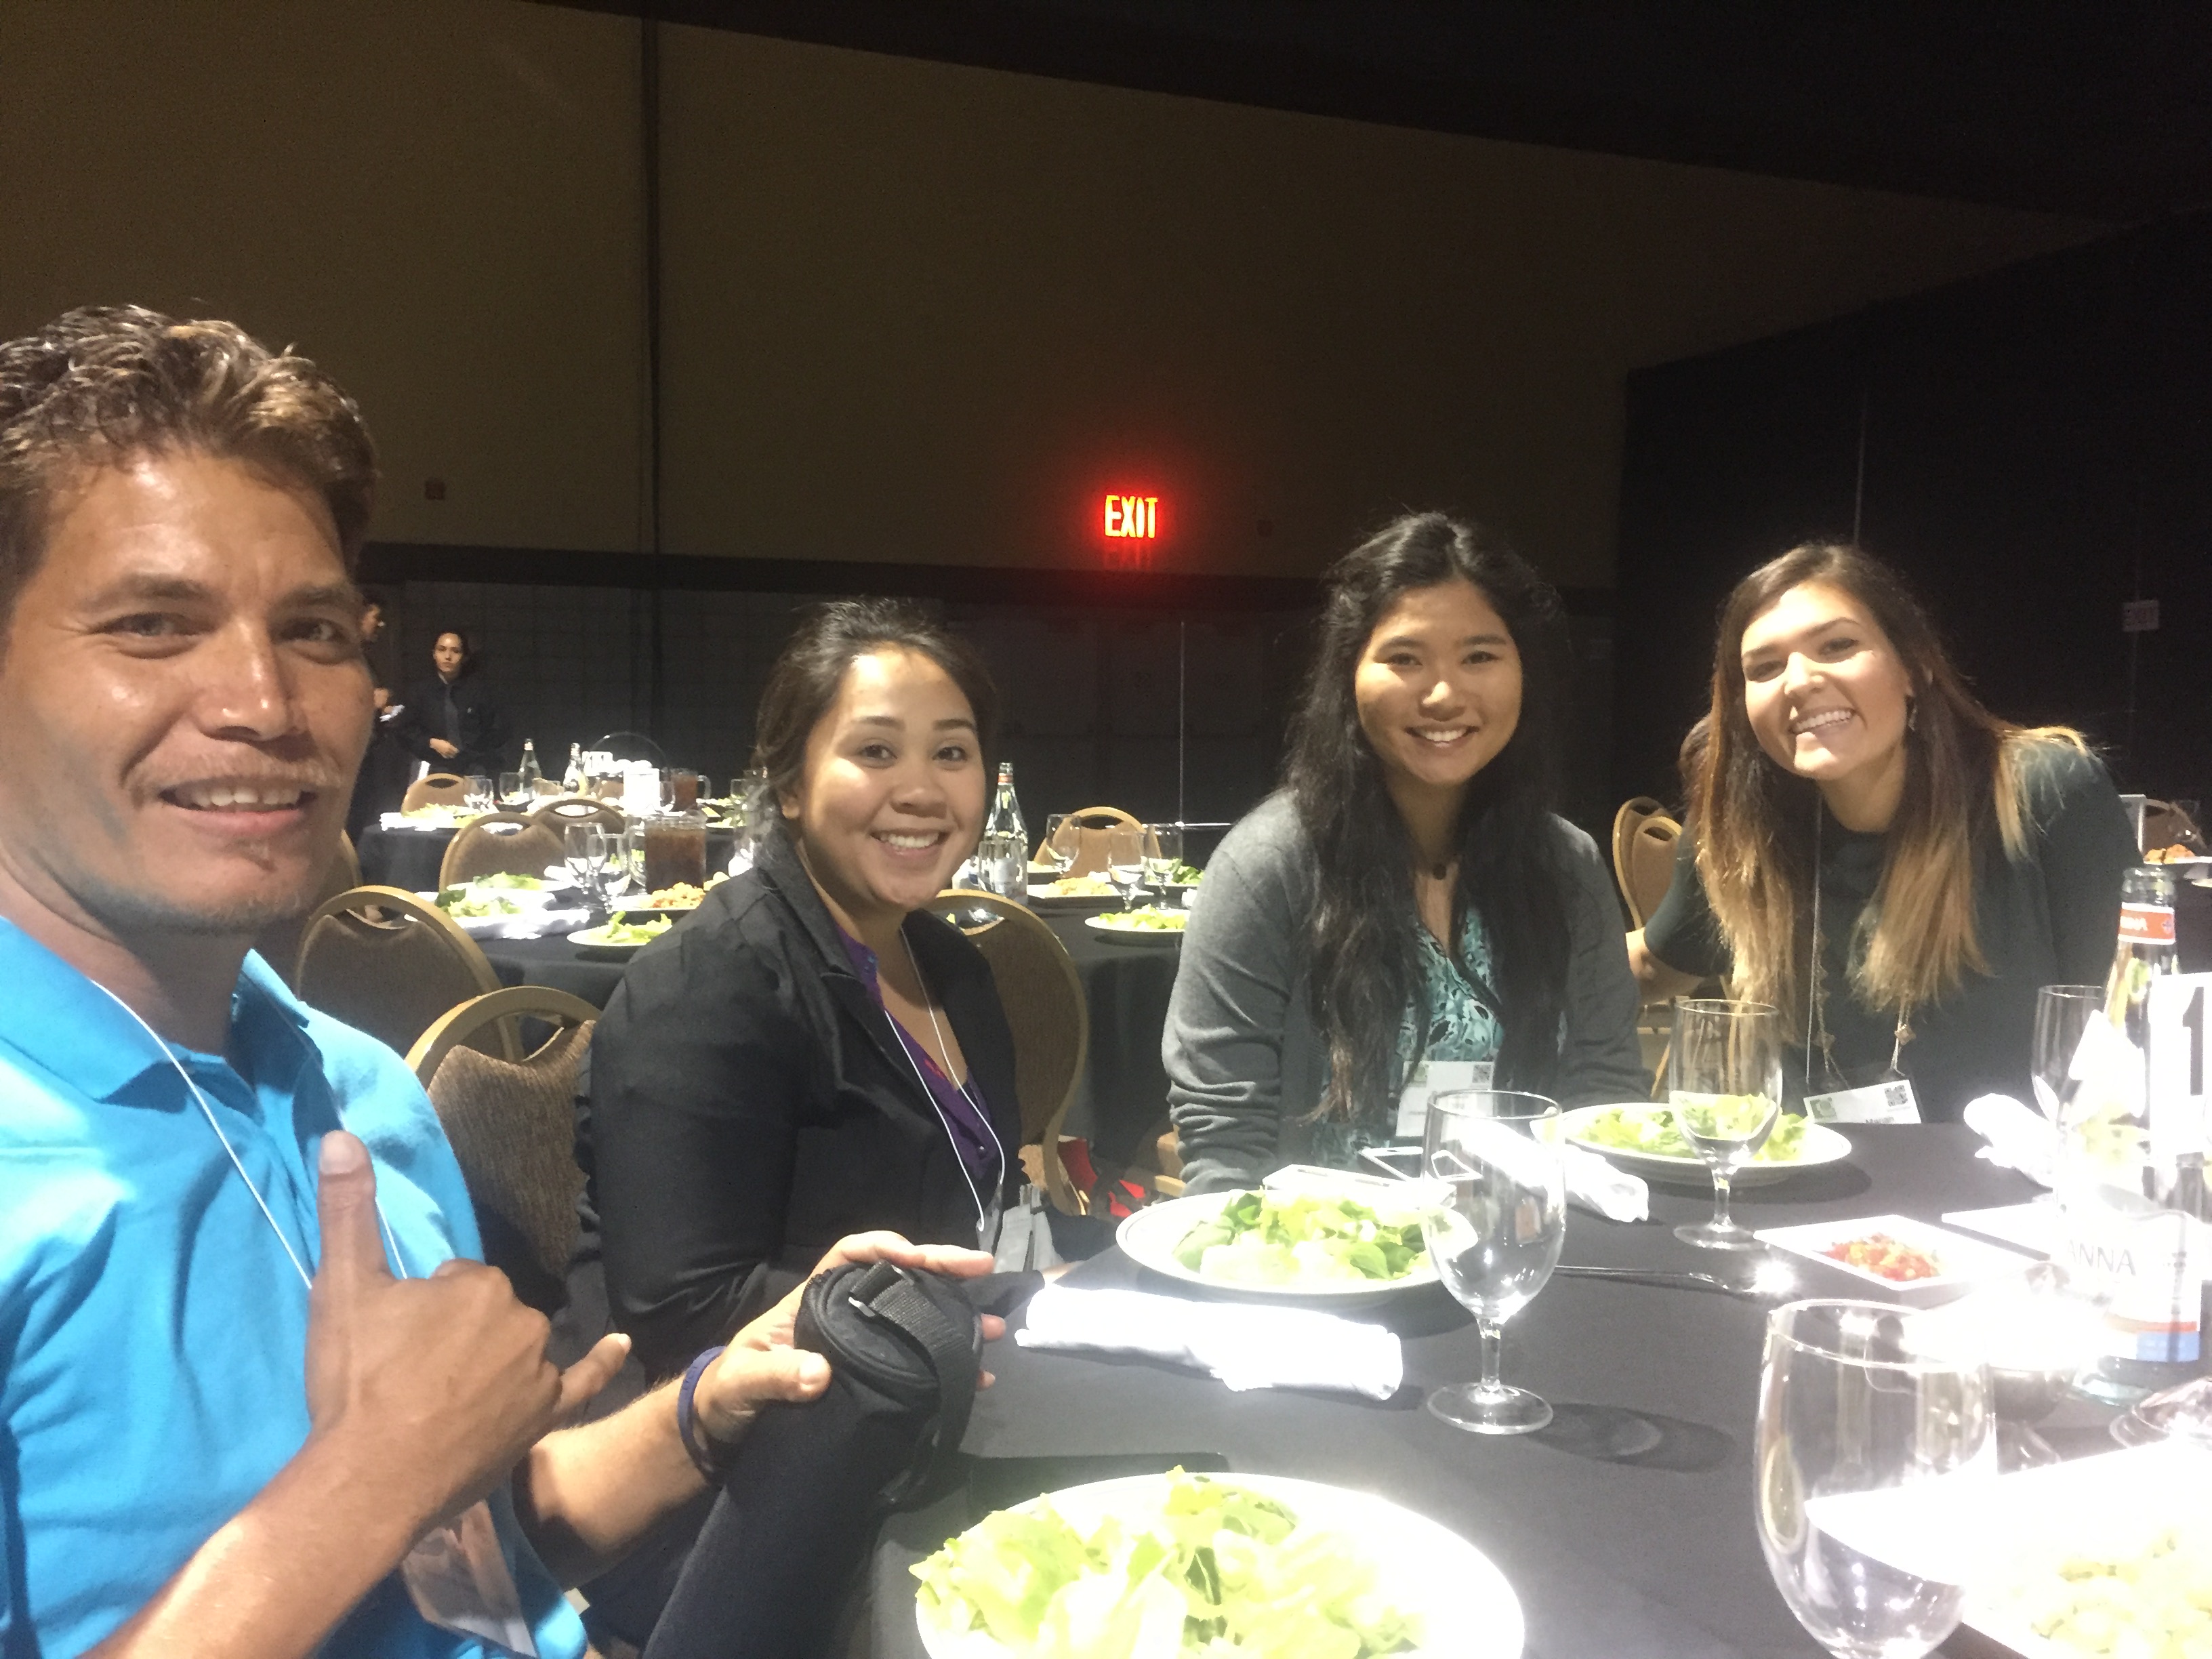 rom left to right: Shane Yaw, Christine Joy Baltazar, Rebecca Oshiro, and Ashley Mariah Lacefield Rodriguez at the SACNAS Conference in October 2016.